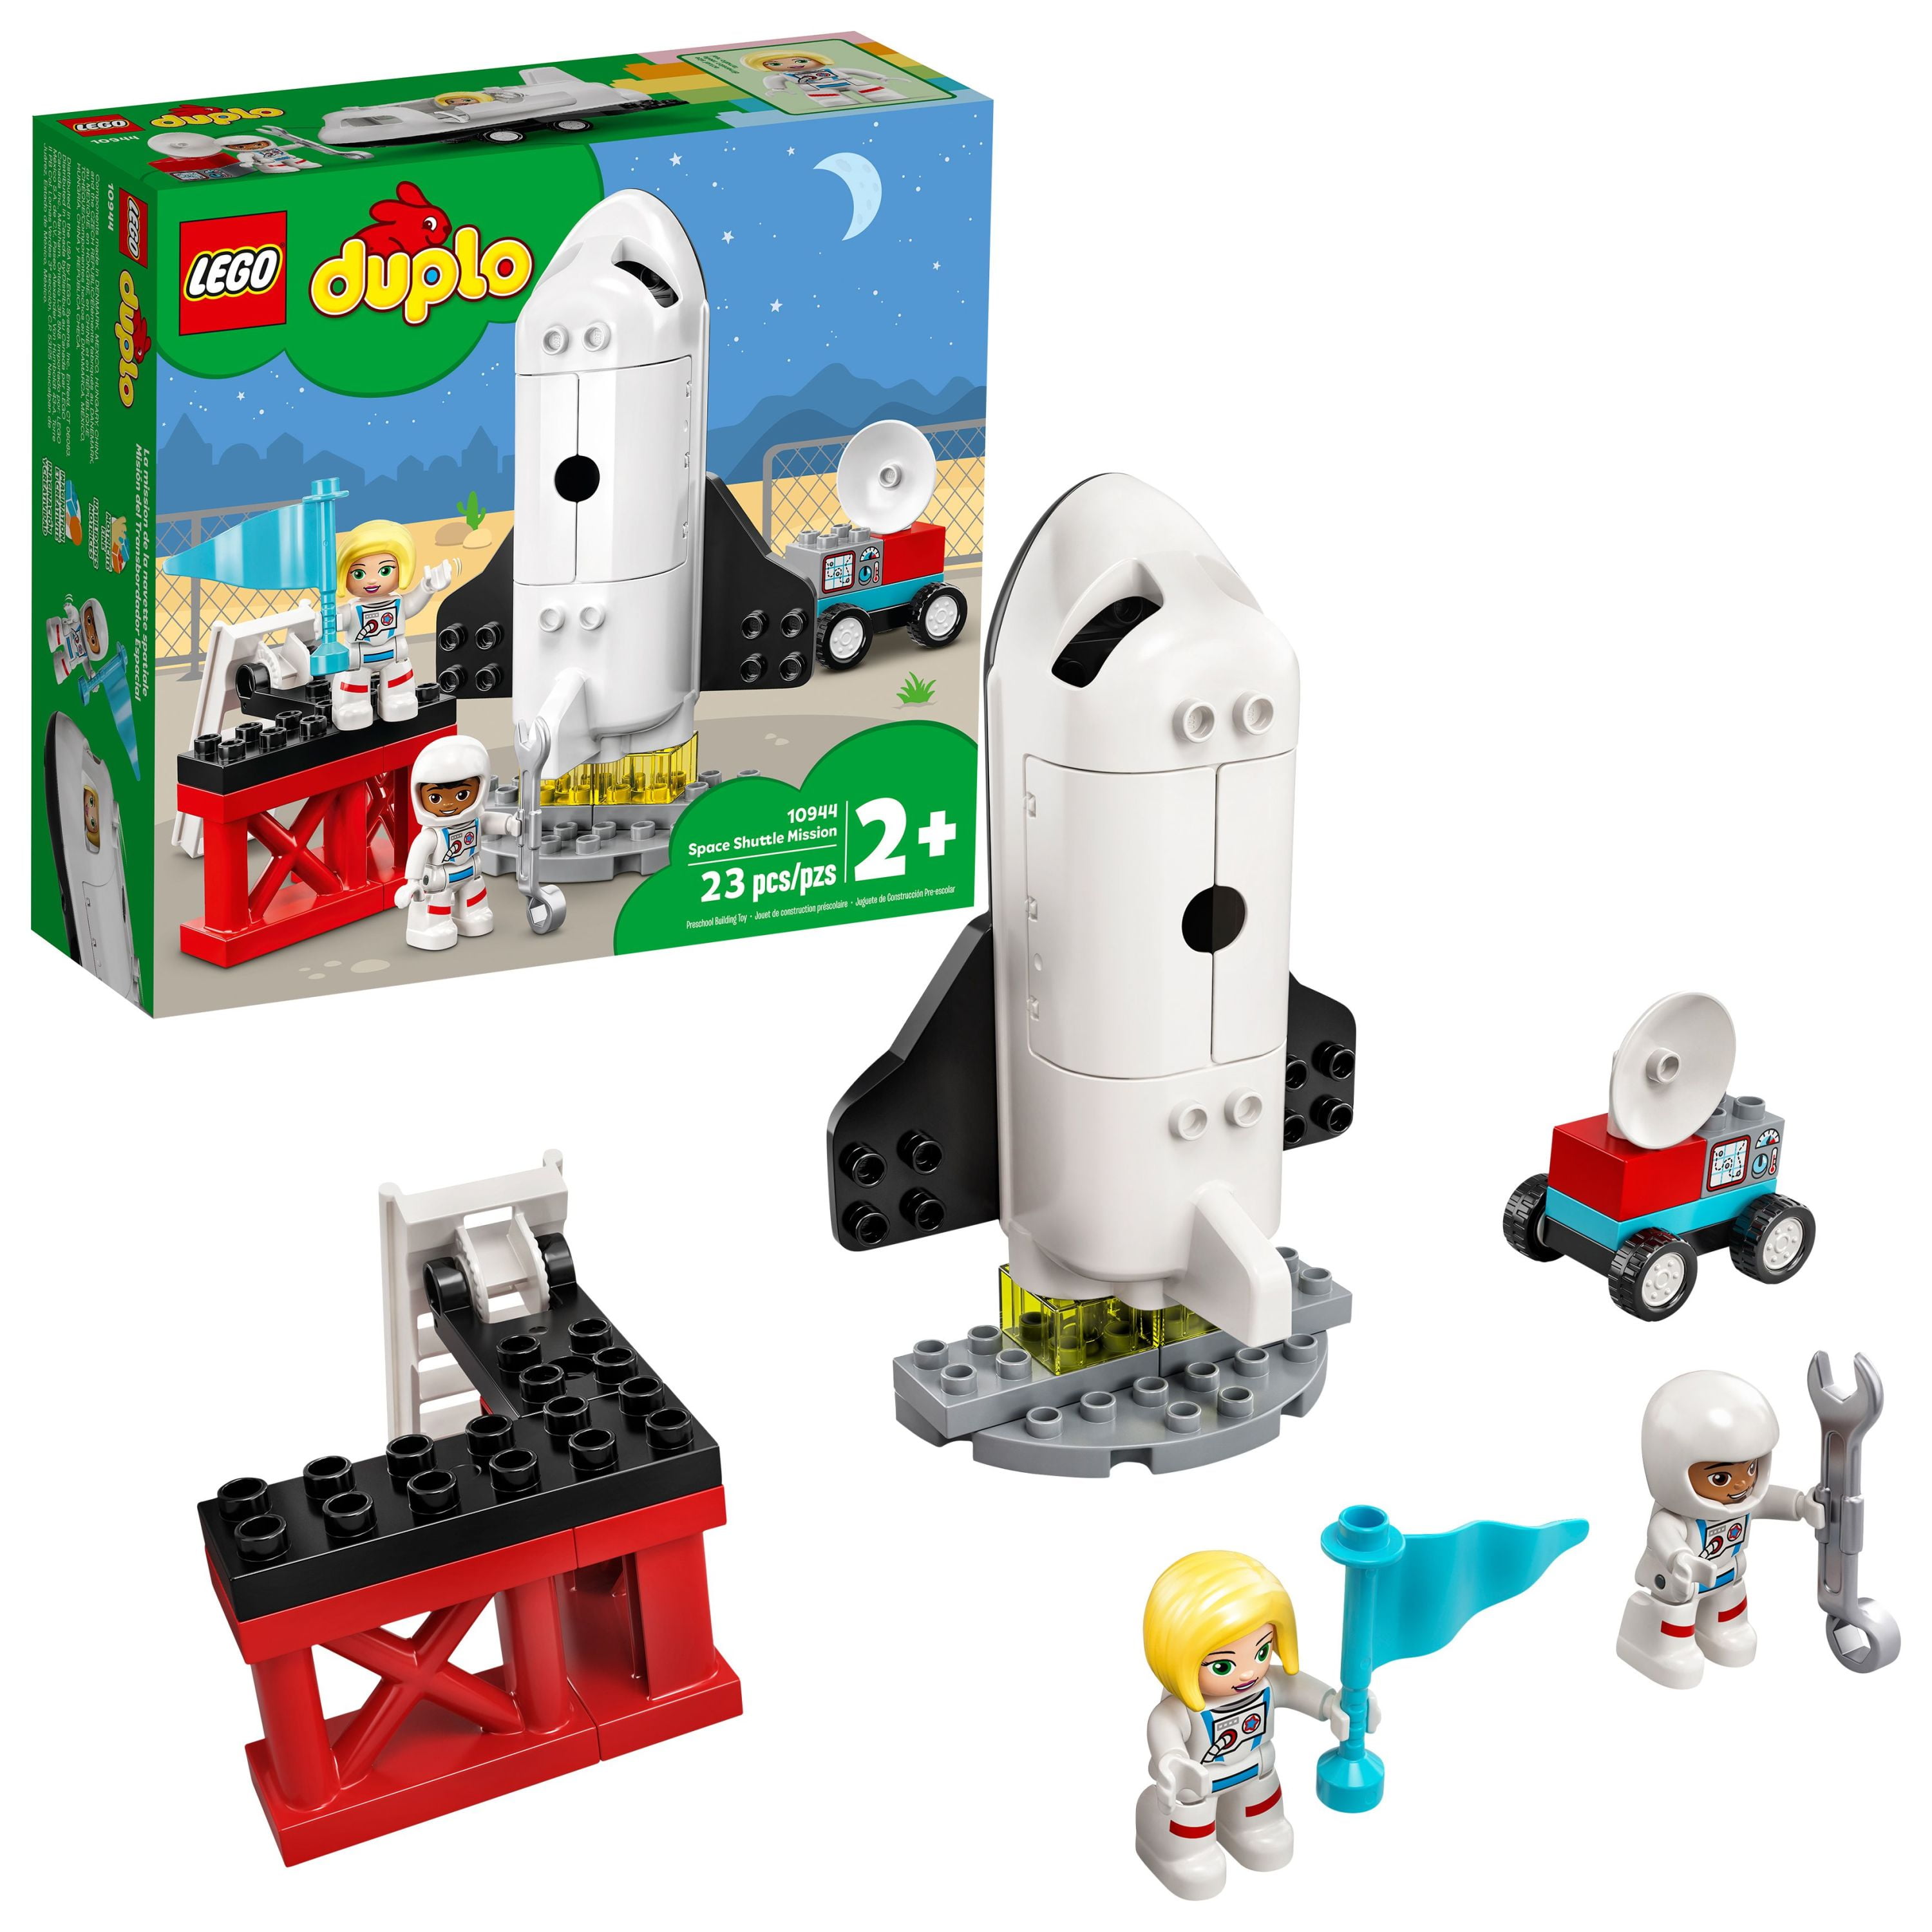 LEGO DUPLO Town Space Shuttle Mission Rocket Toy 10944, Set for Preschool Toddlers Age 2 - 4 Years Old with Astronaut Figures